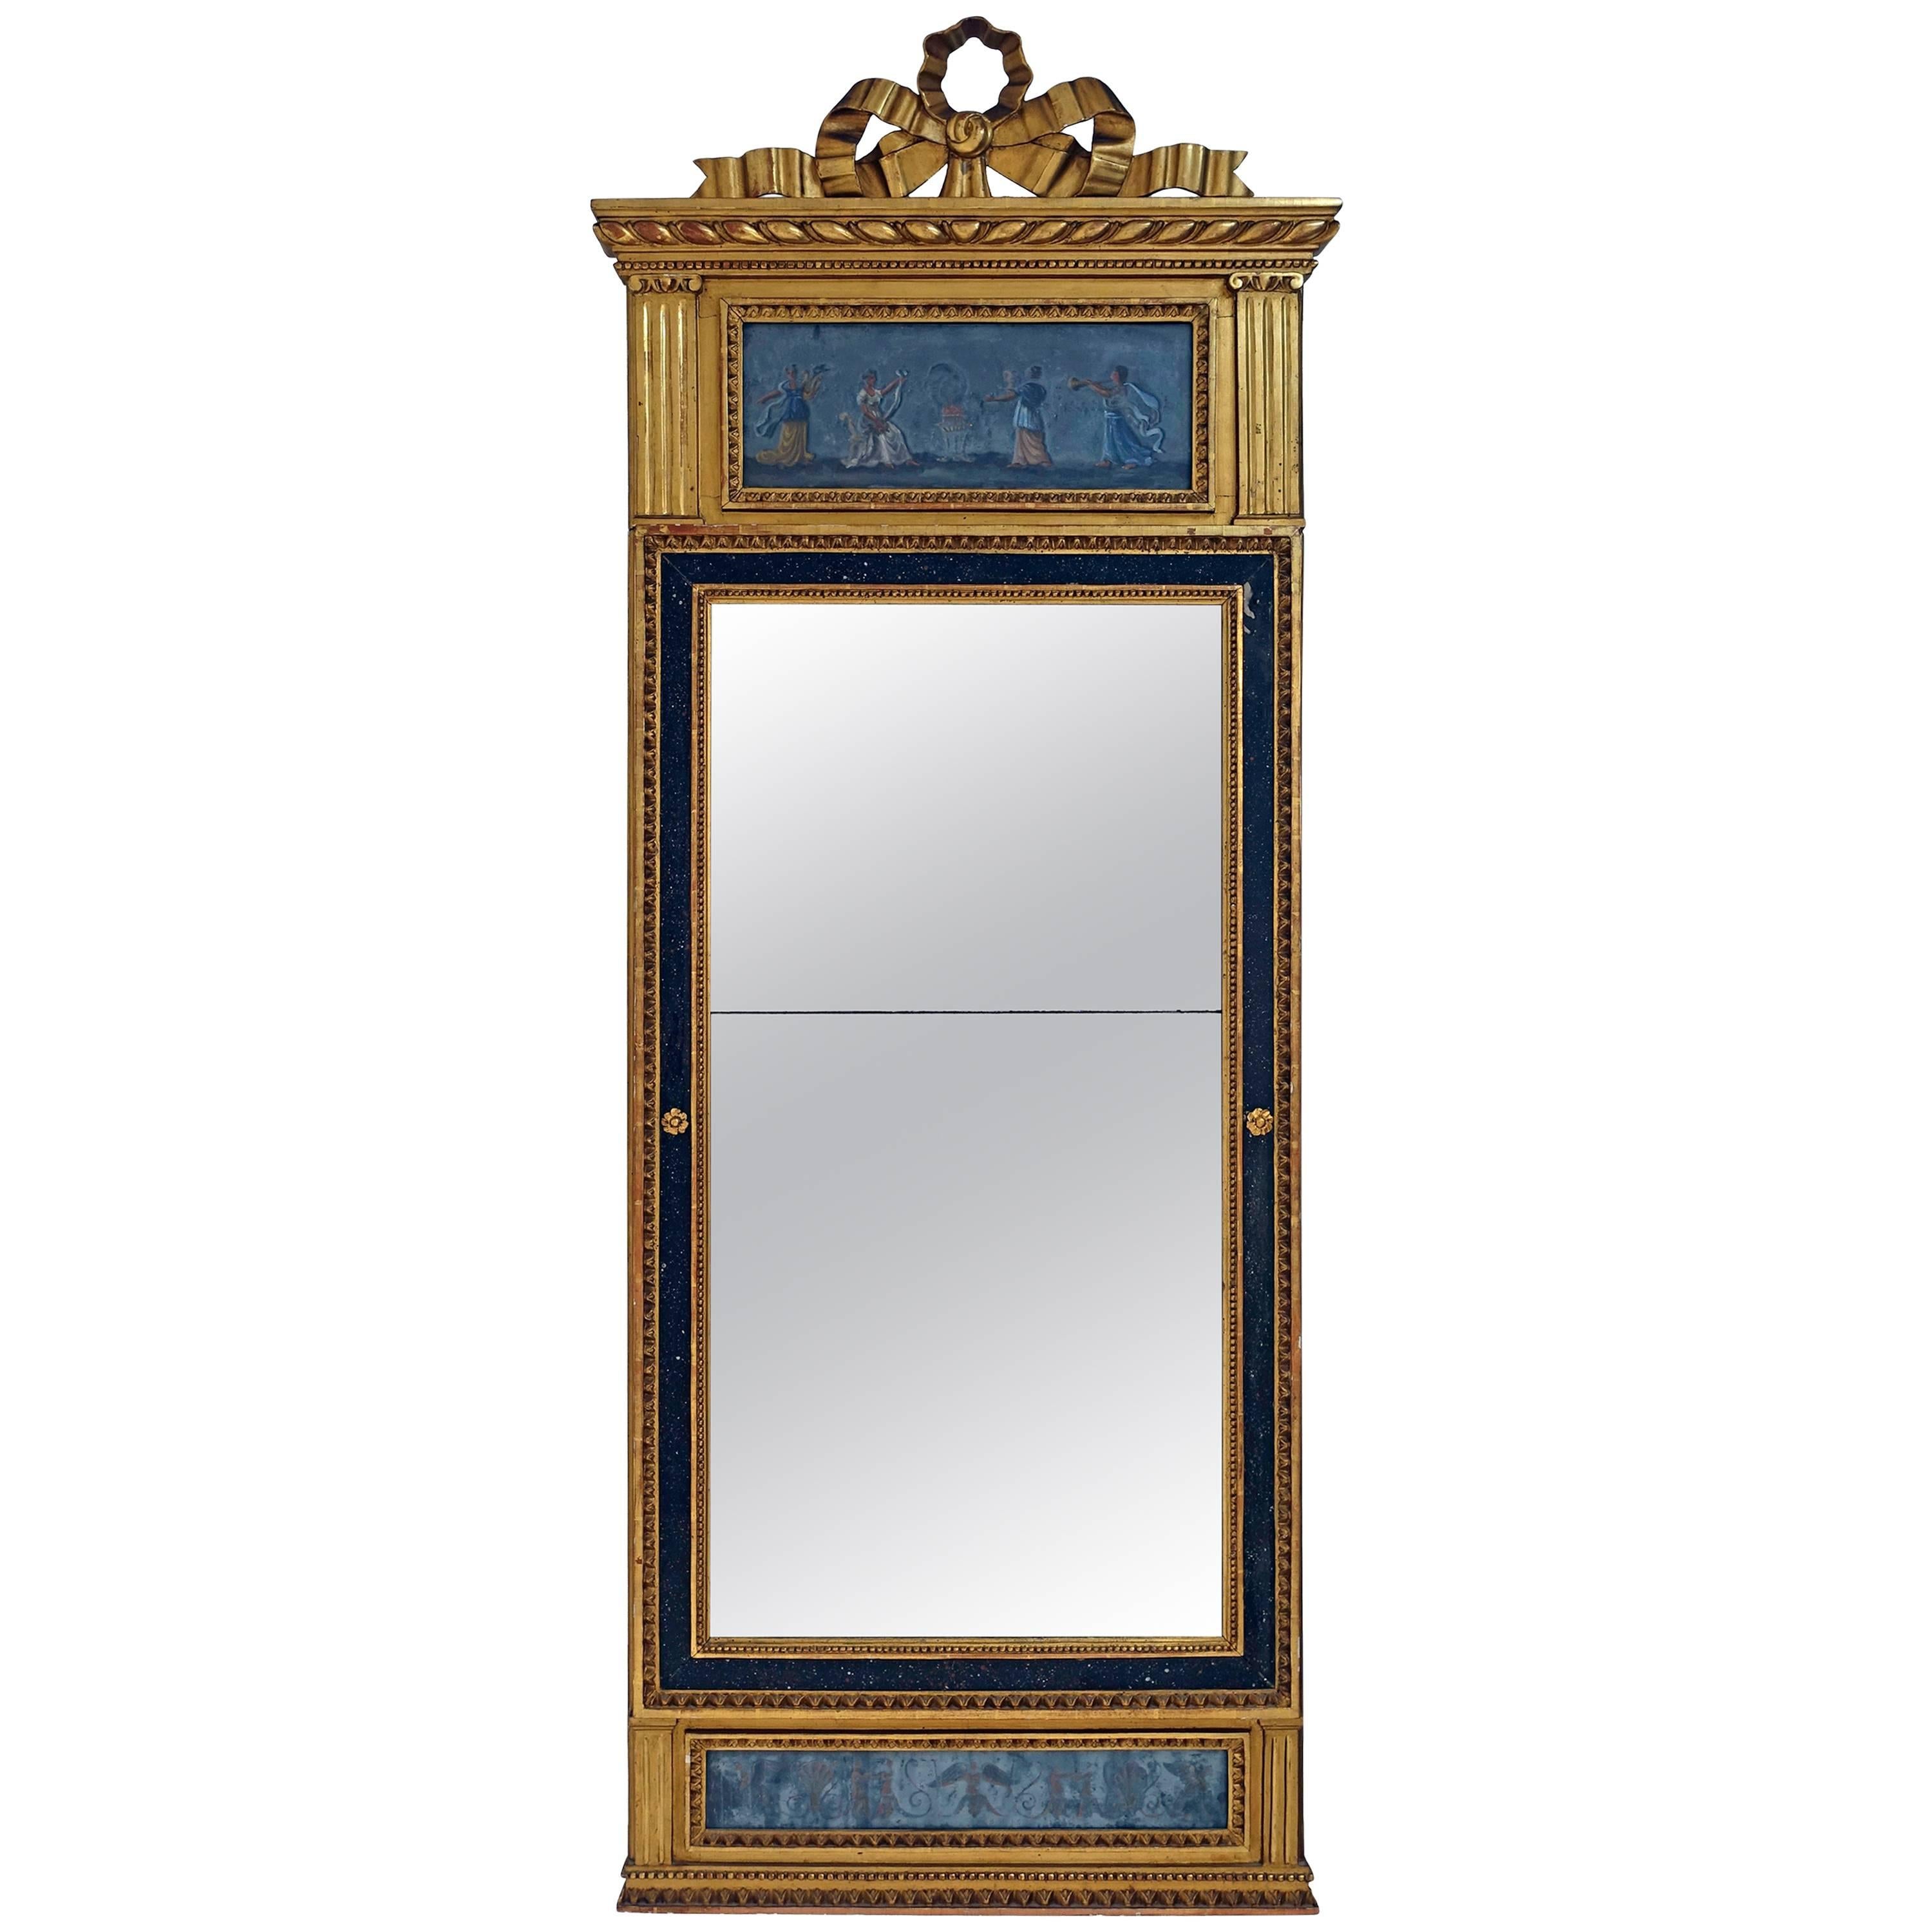 French Neoclassical Giltwood and Eglomise Pier Mirror